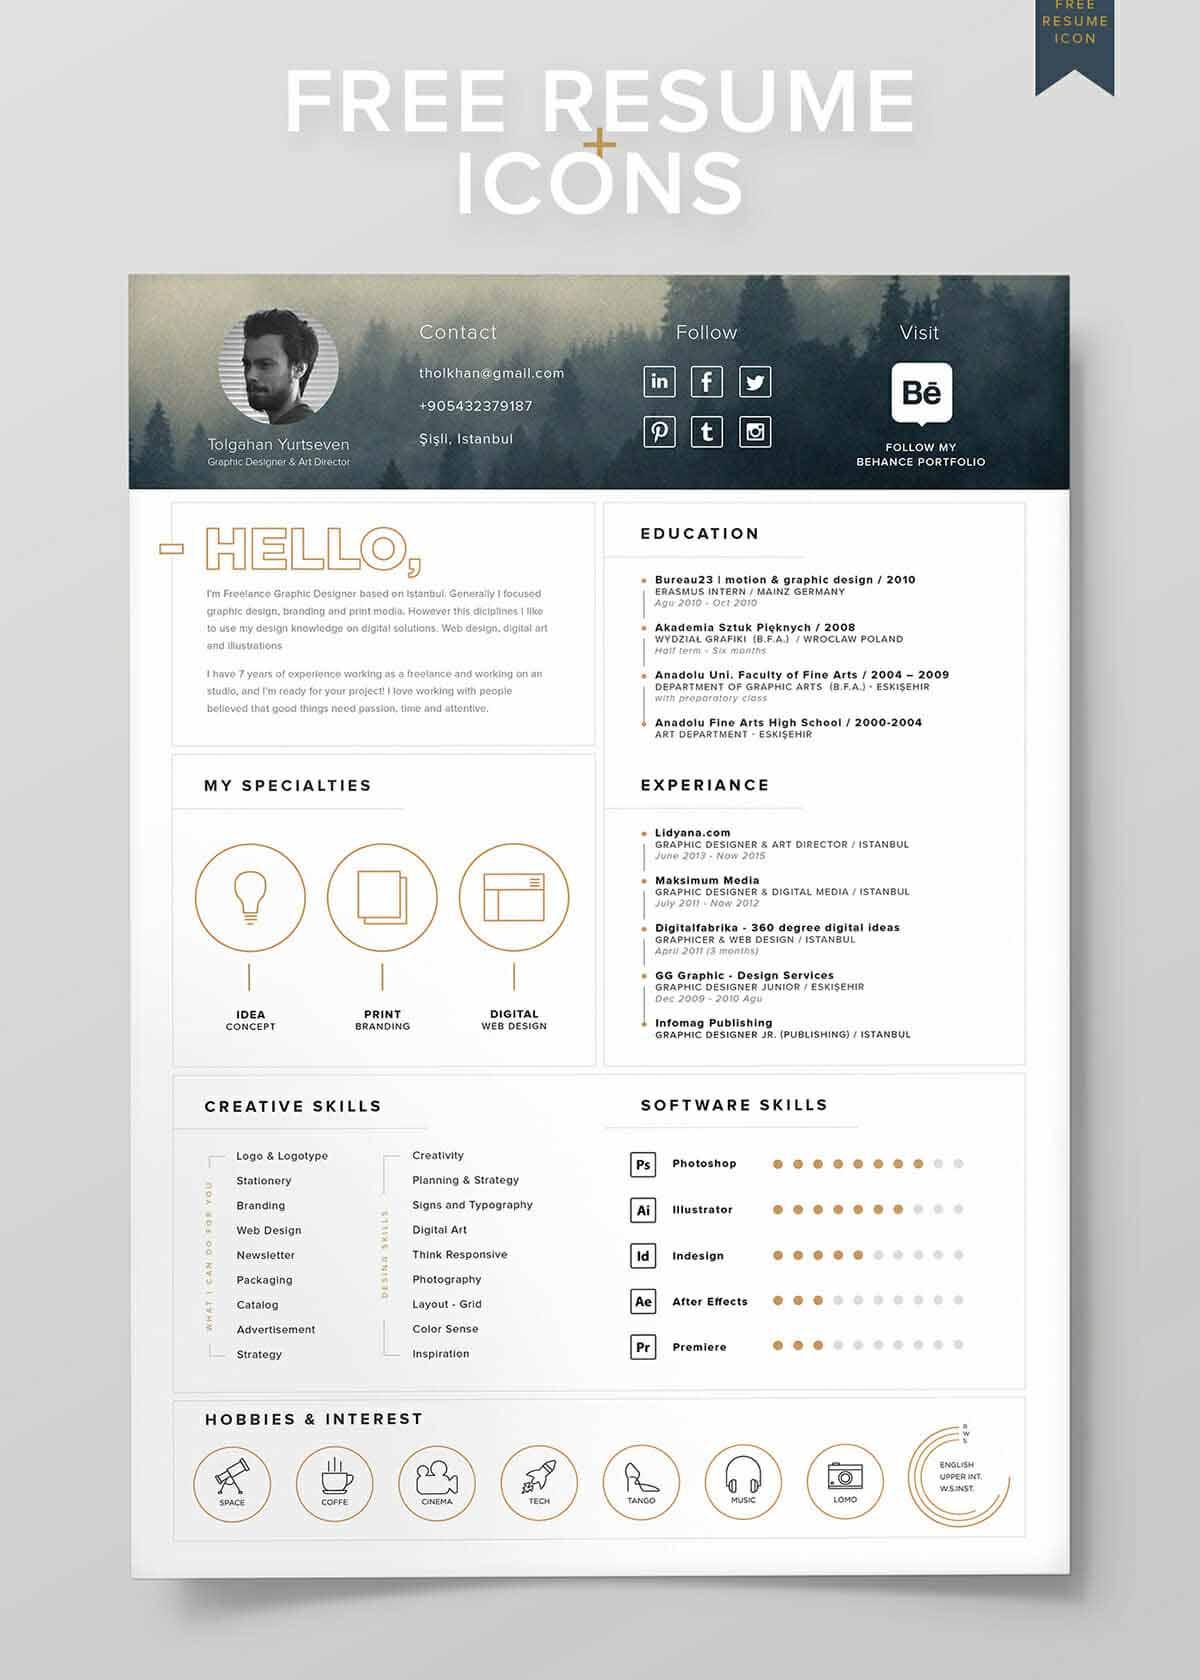 good resume design with golden icons and photo in header